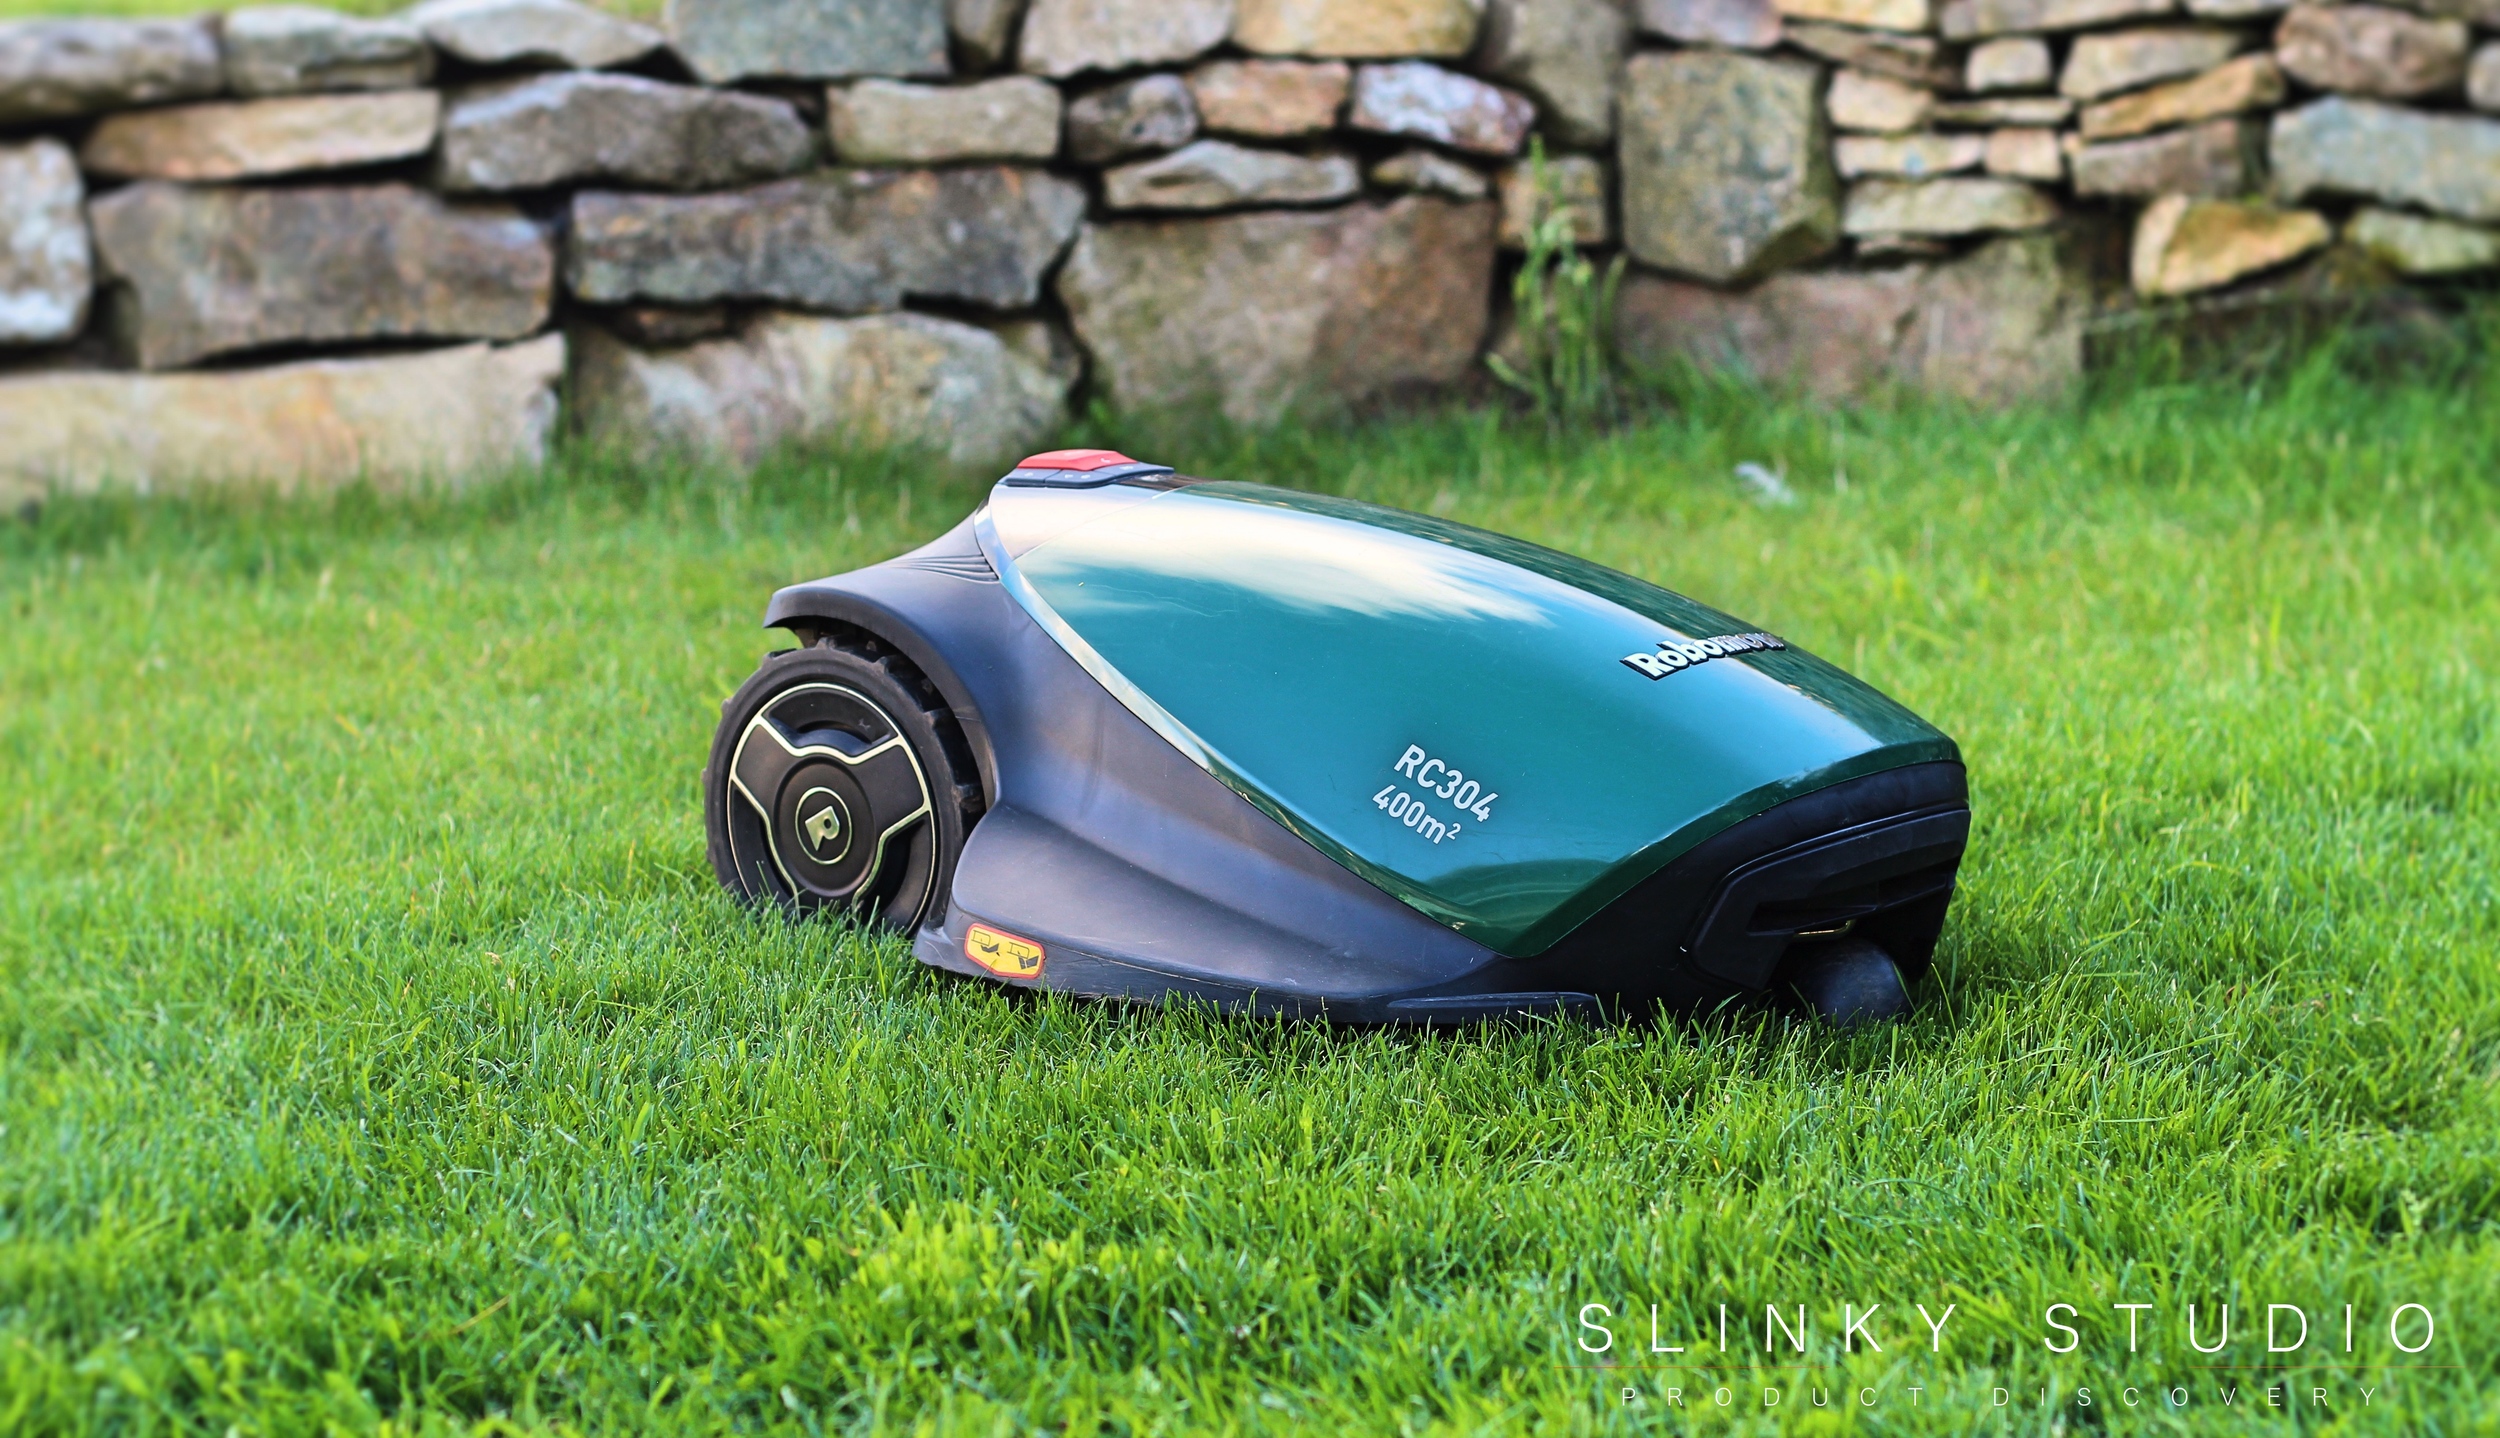 Robomow RC304 Robot Lawnmower Cutting Lawn Front View.jpg